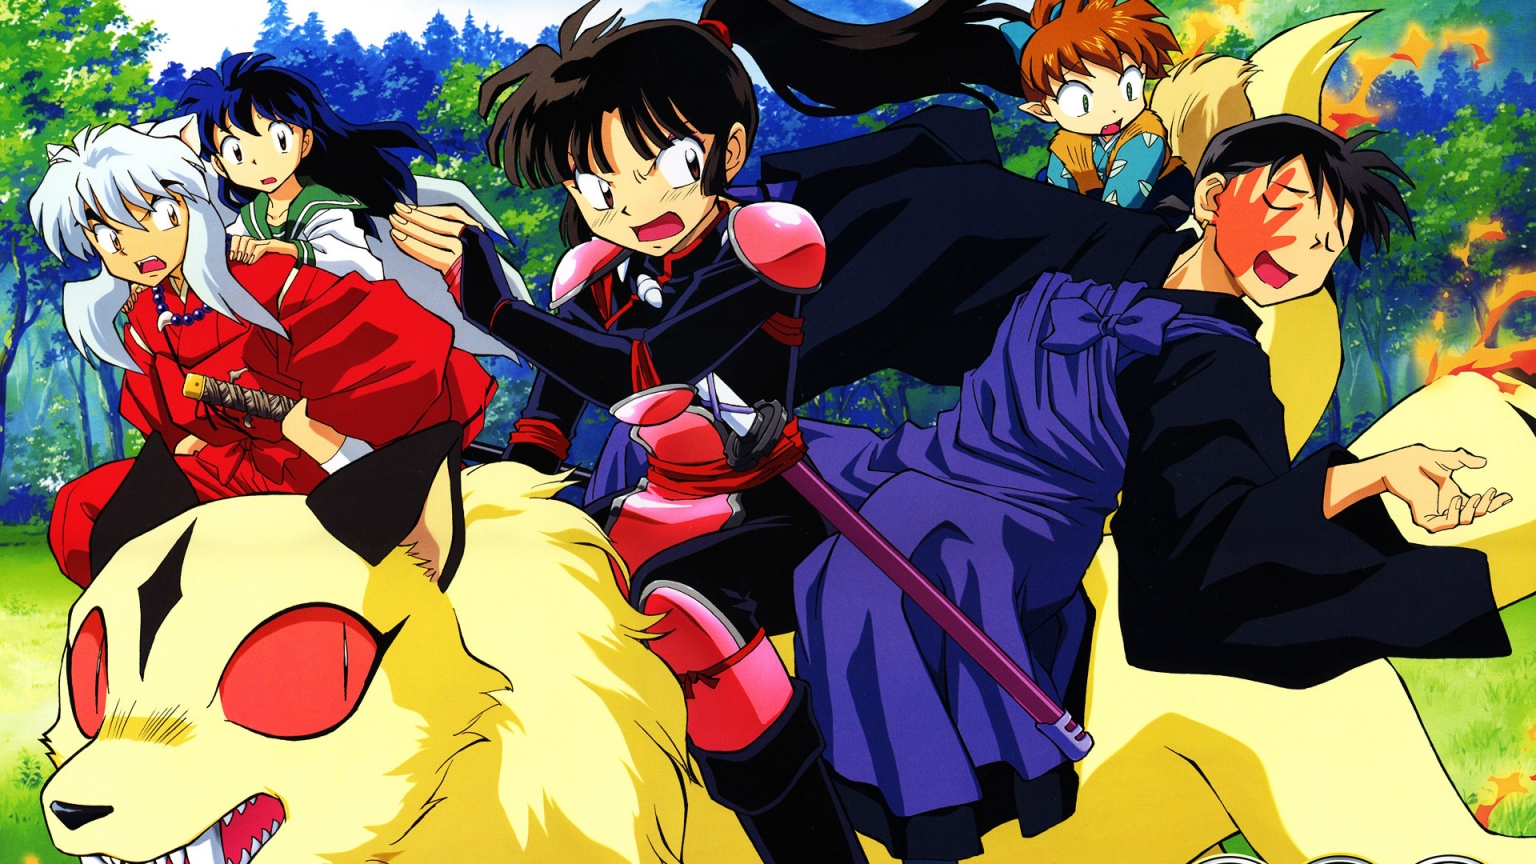 Inuyasha Characters for 1536 x 864 HDTV resolution